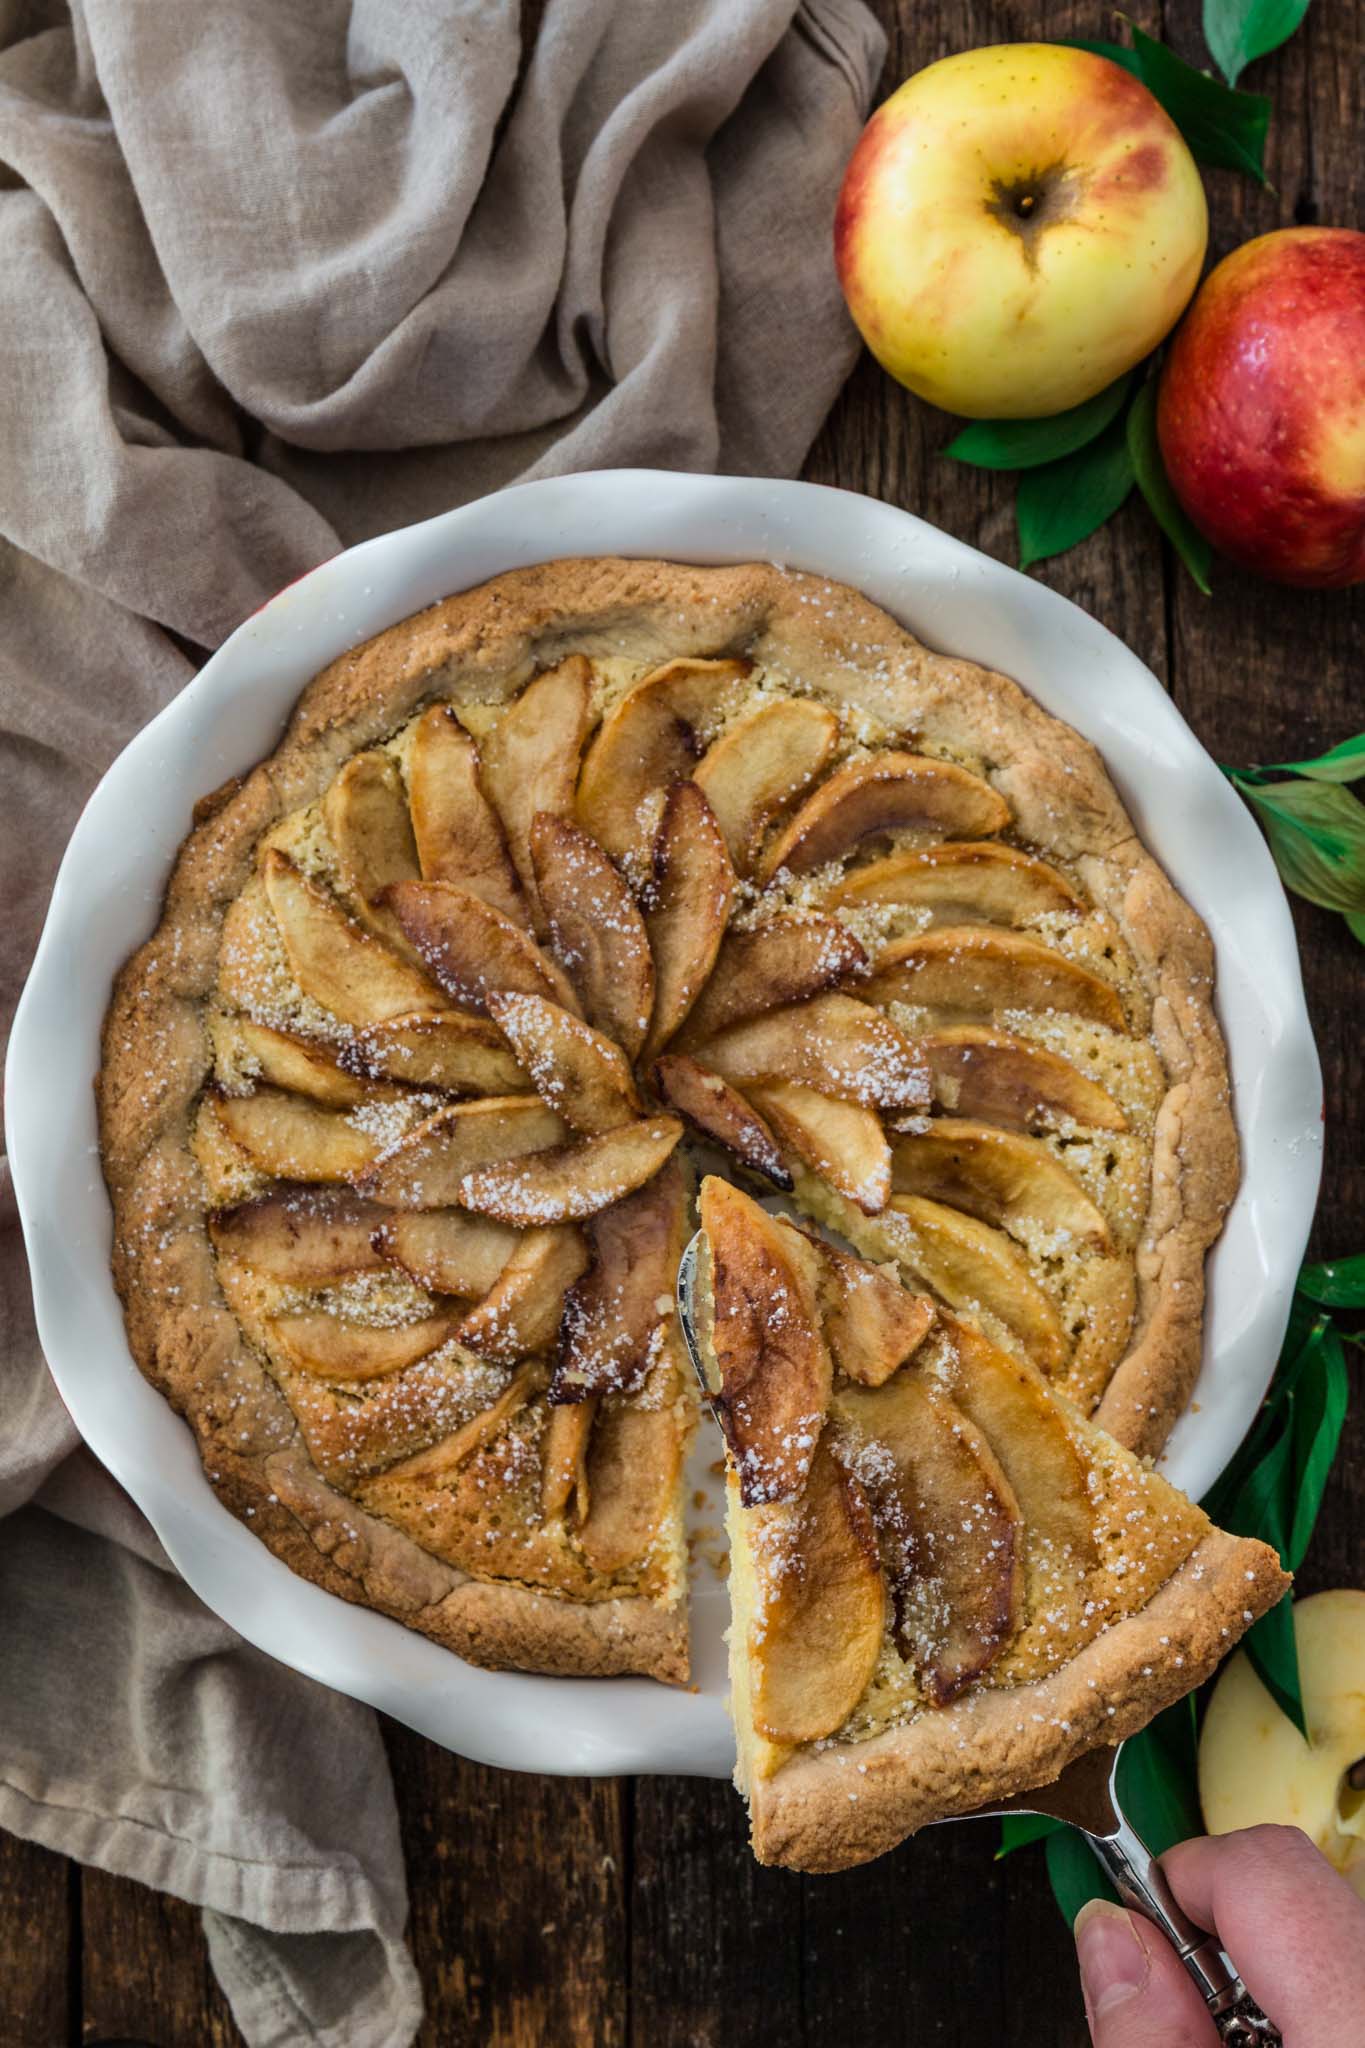 Almond Apple Pie | www.oliviascuisine.com | Inspired by the French Tarte Bourdaloue, this apple version consists of traditional almond cream topped with browned/caramelized apple slices. If you're tired of the old classic apple pie, give this a try. You won't regret it! (Recipe and food photography by @oliviascuisine.)